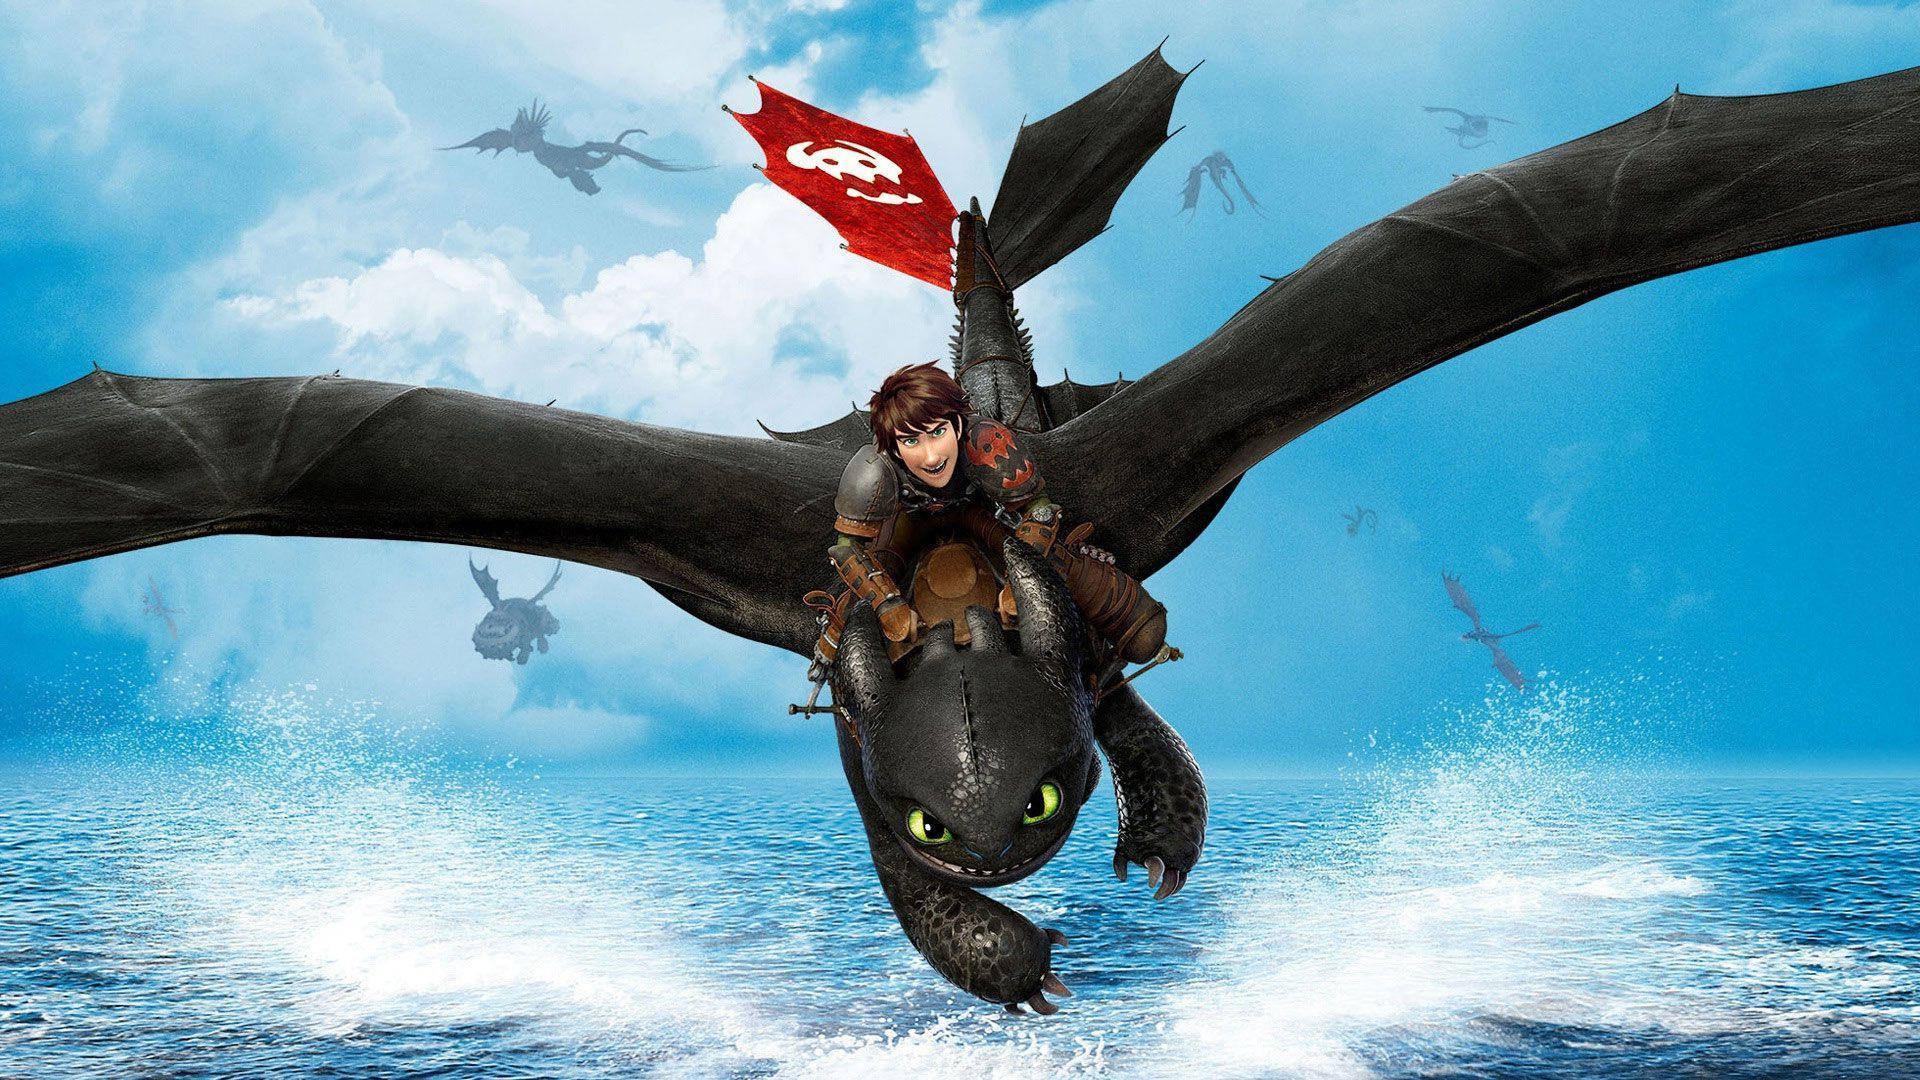 Top 999+ How To Train Your Dragon Wallpaper Full HD, 4K✅Free to Use